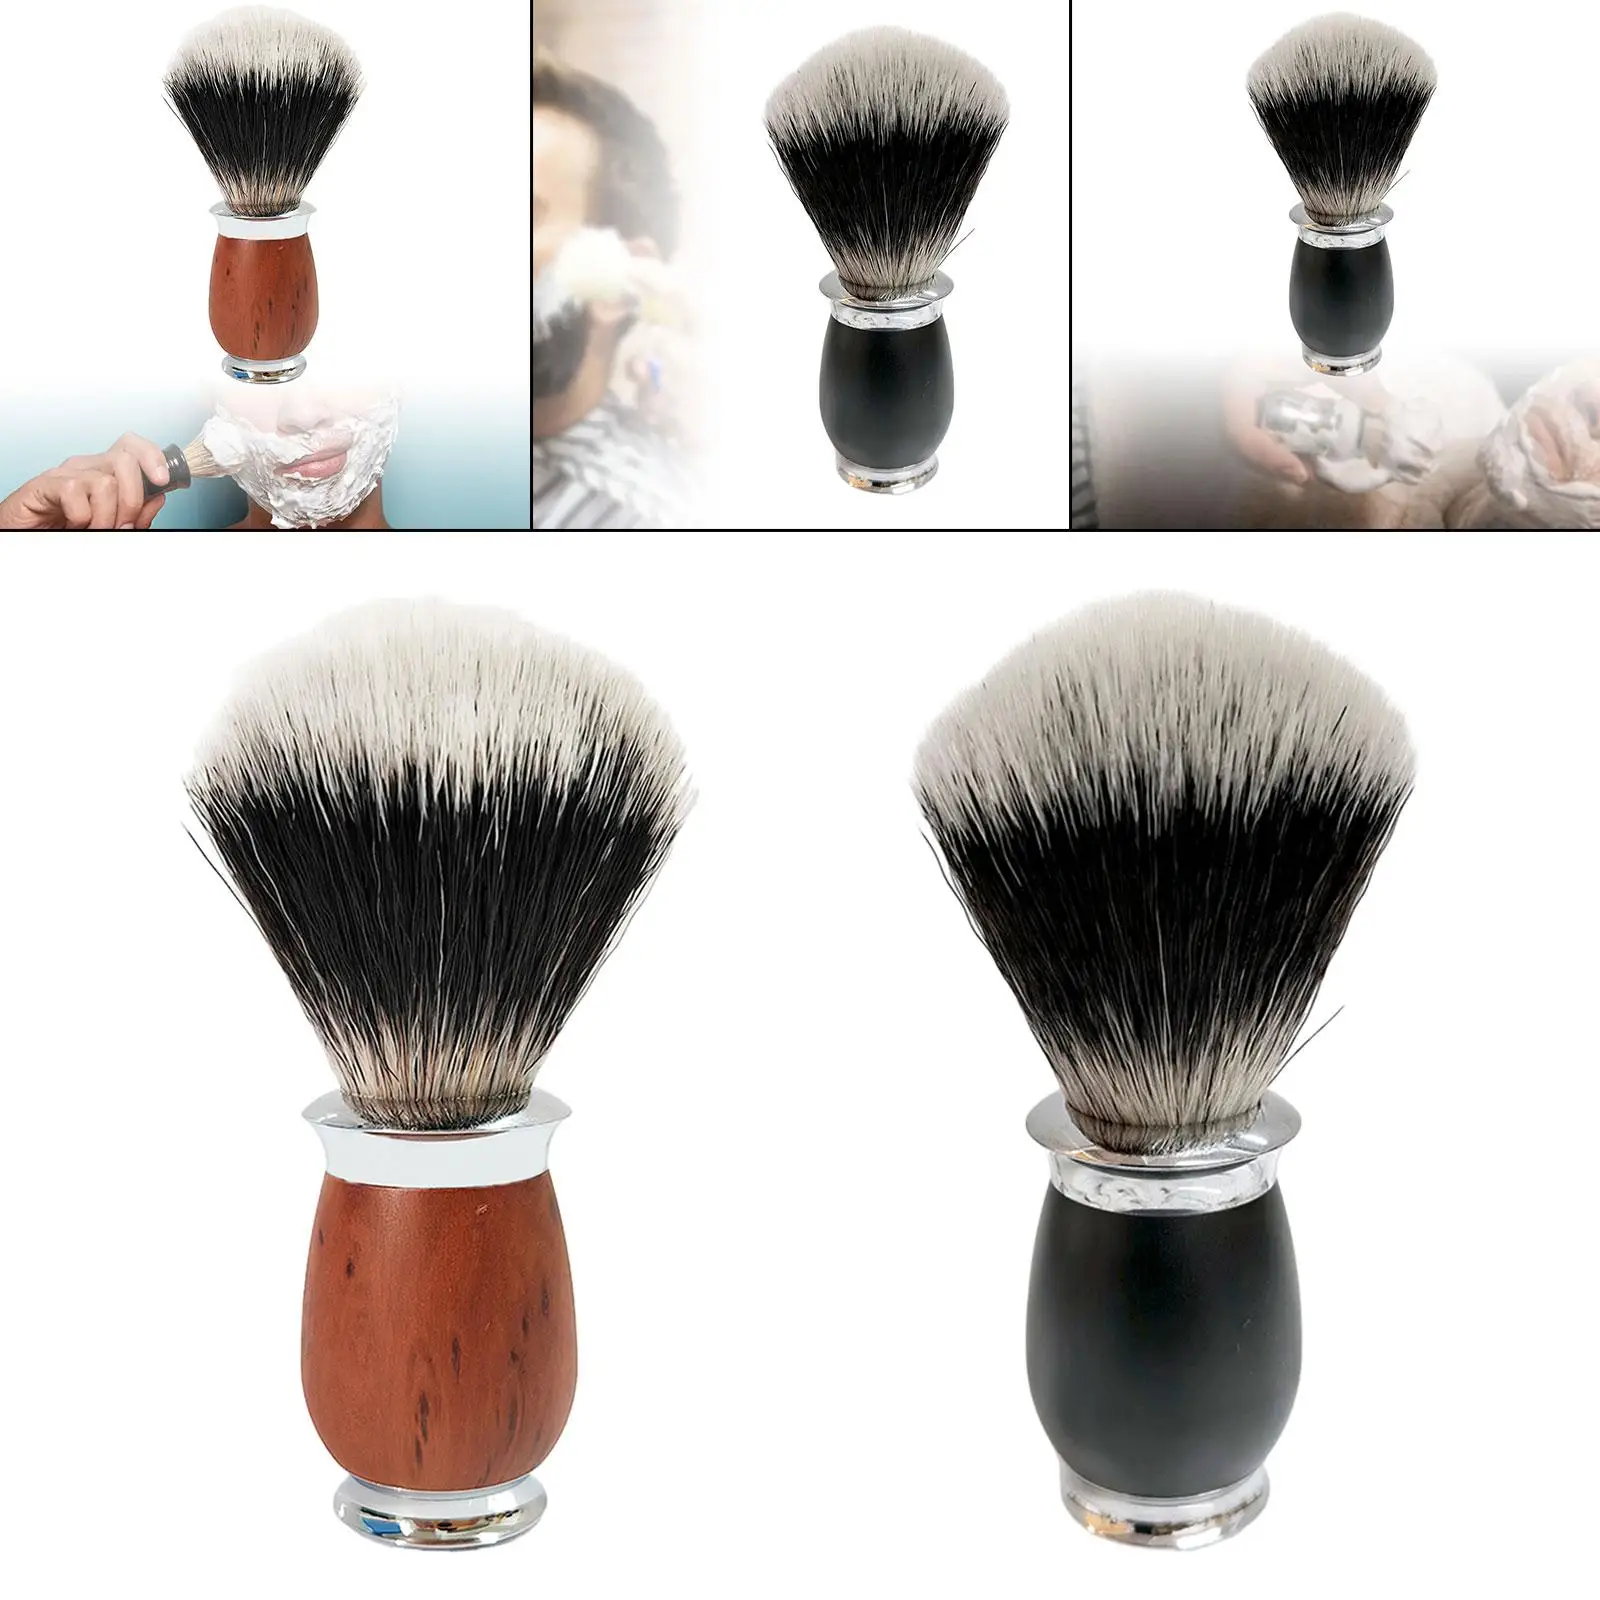 Men Shaving Brush Classic Nylon Bristle Rich Lather Christmas Gifts Shave Accessory Portable Face Cleaning for Dad Boyfriend